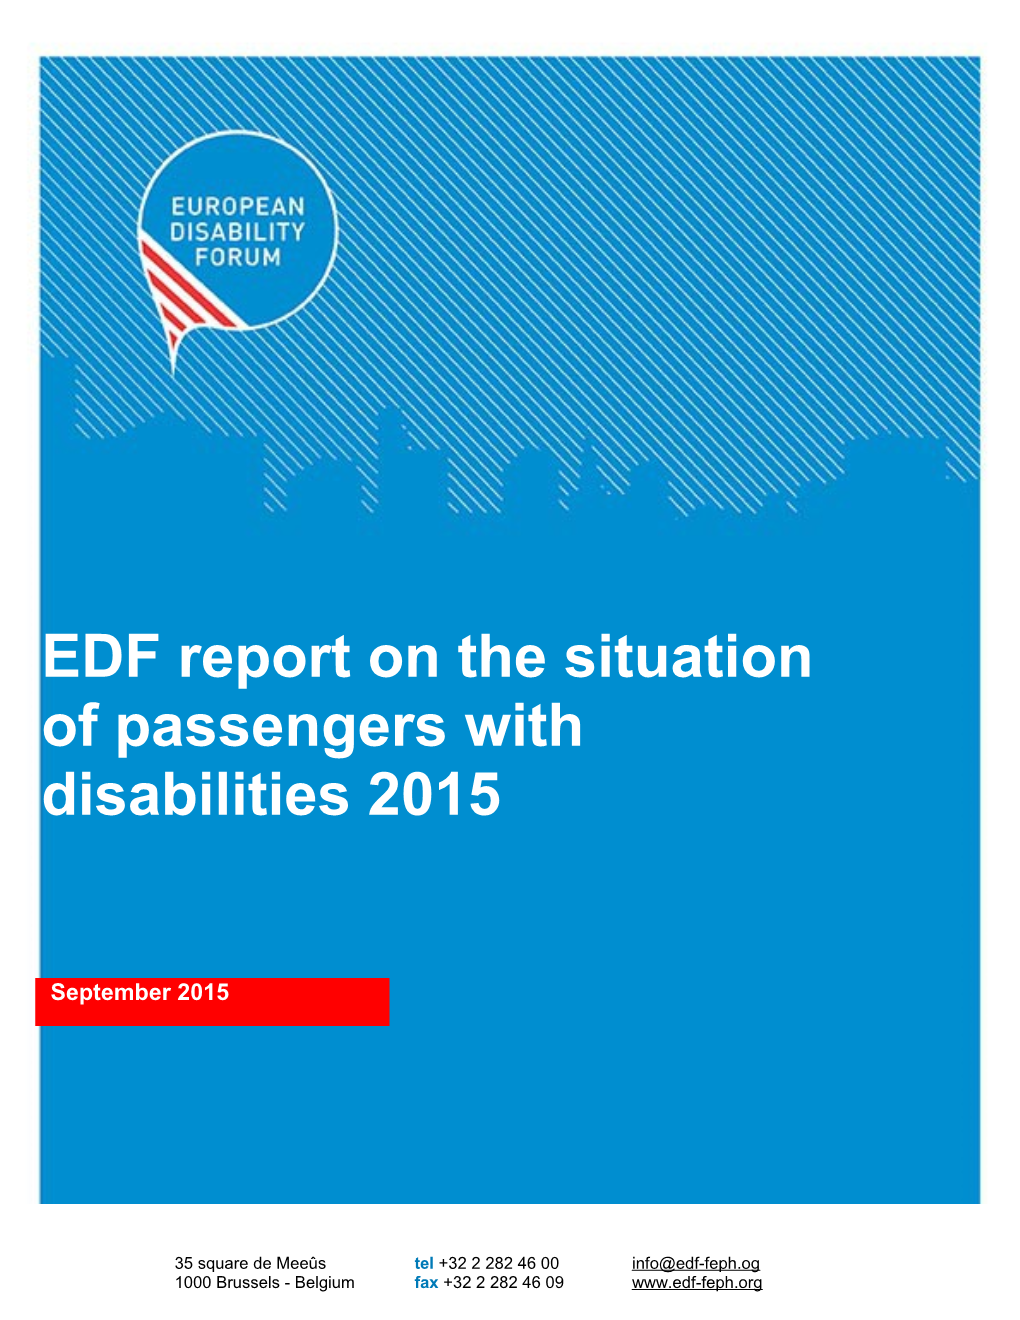 EDF Report on the Situation of Passengers with Disabilities 2015